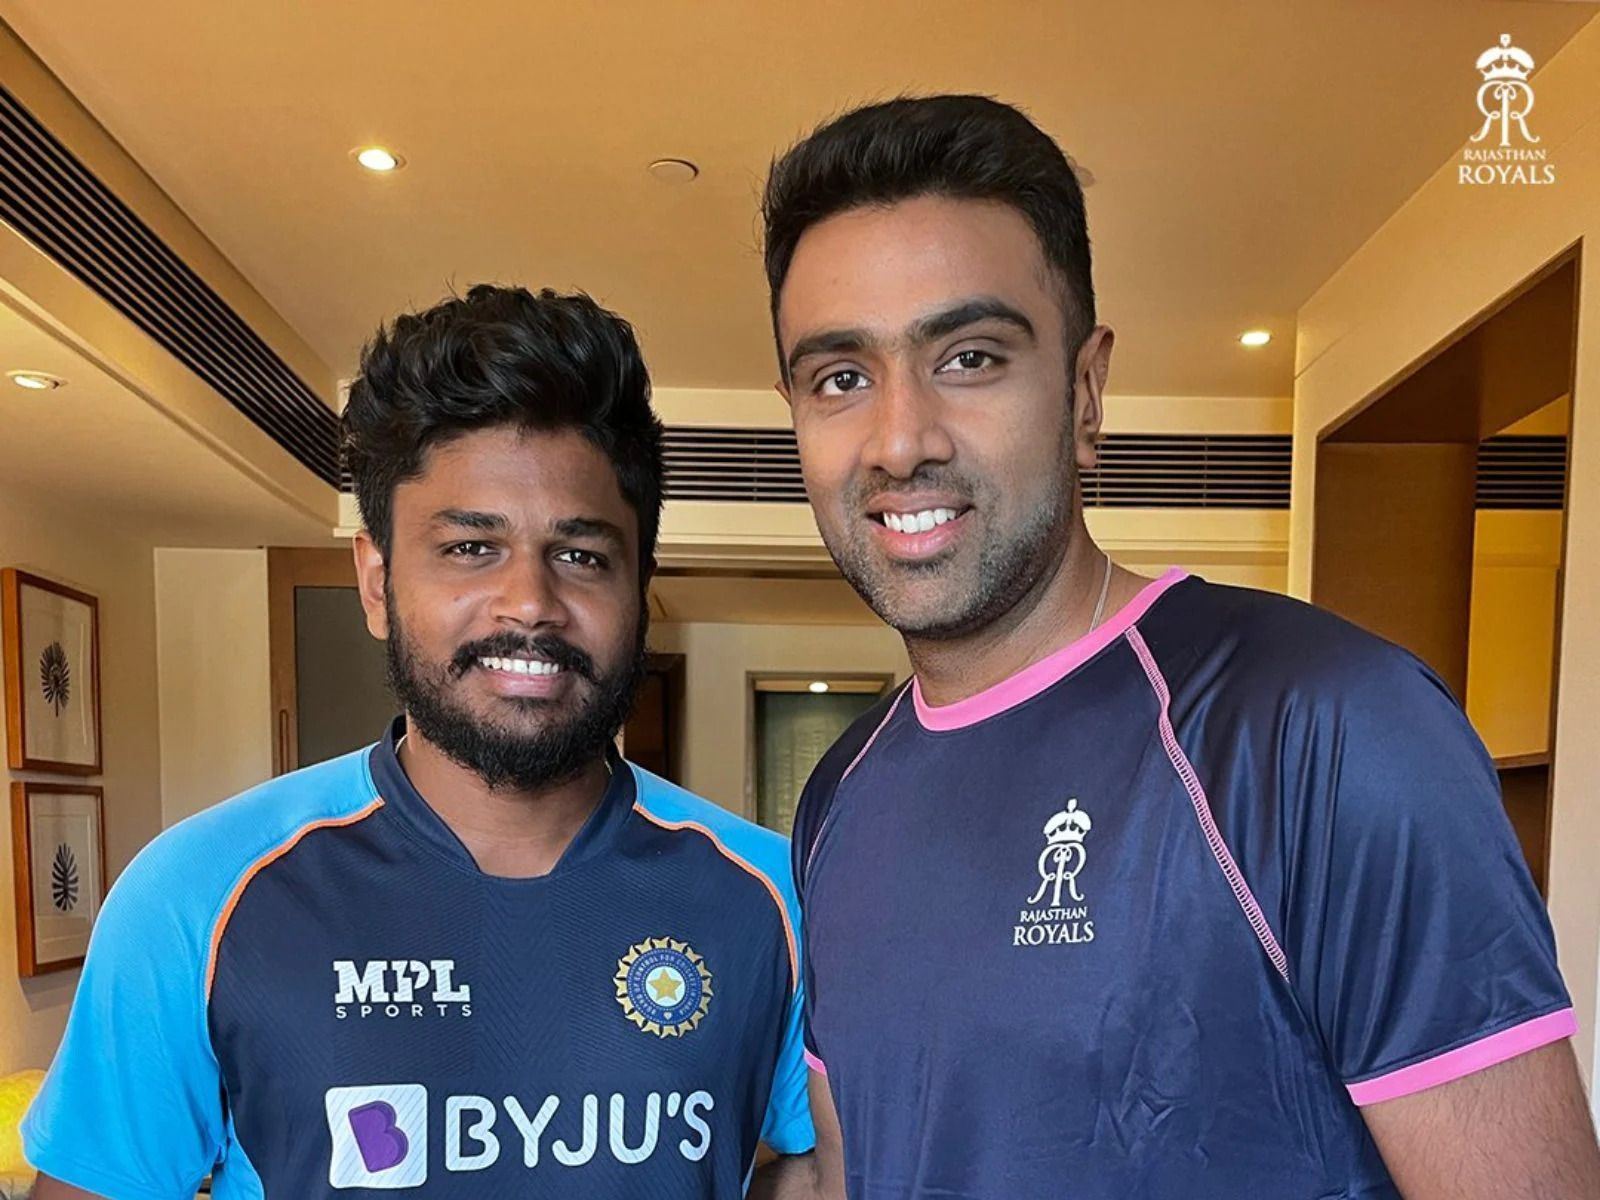 Sanju Samson (left) and R Ashwin (right) will share the dressing room in IPL 2022.